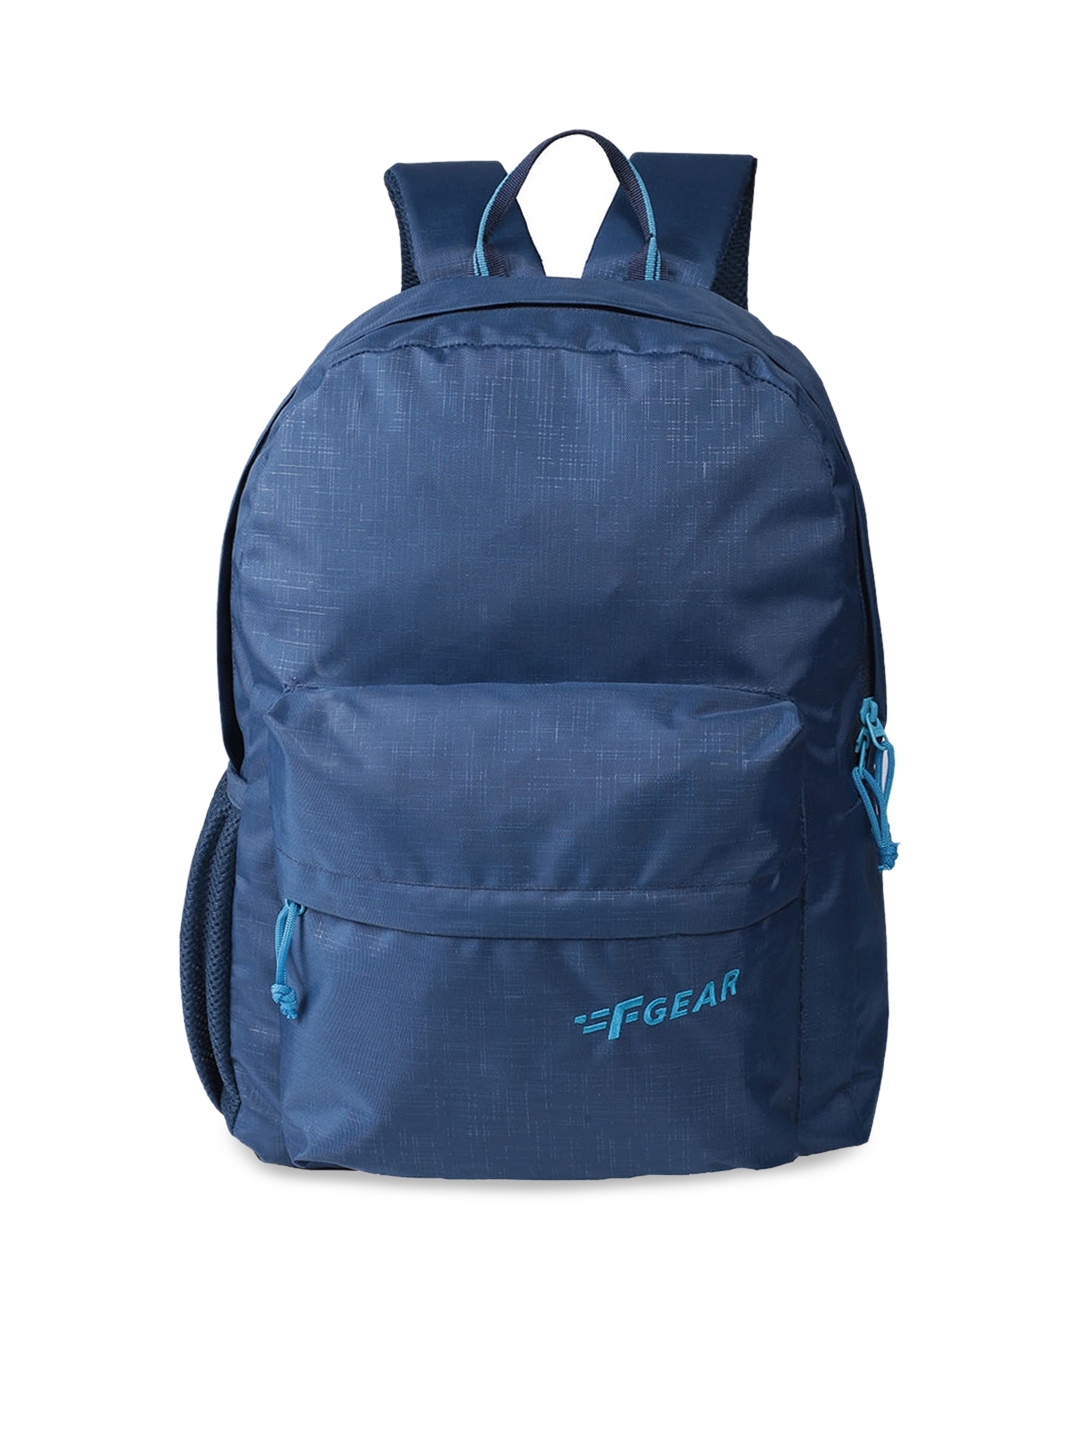 F Gear Unisex Navy Blue Solid Backpack